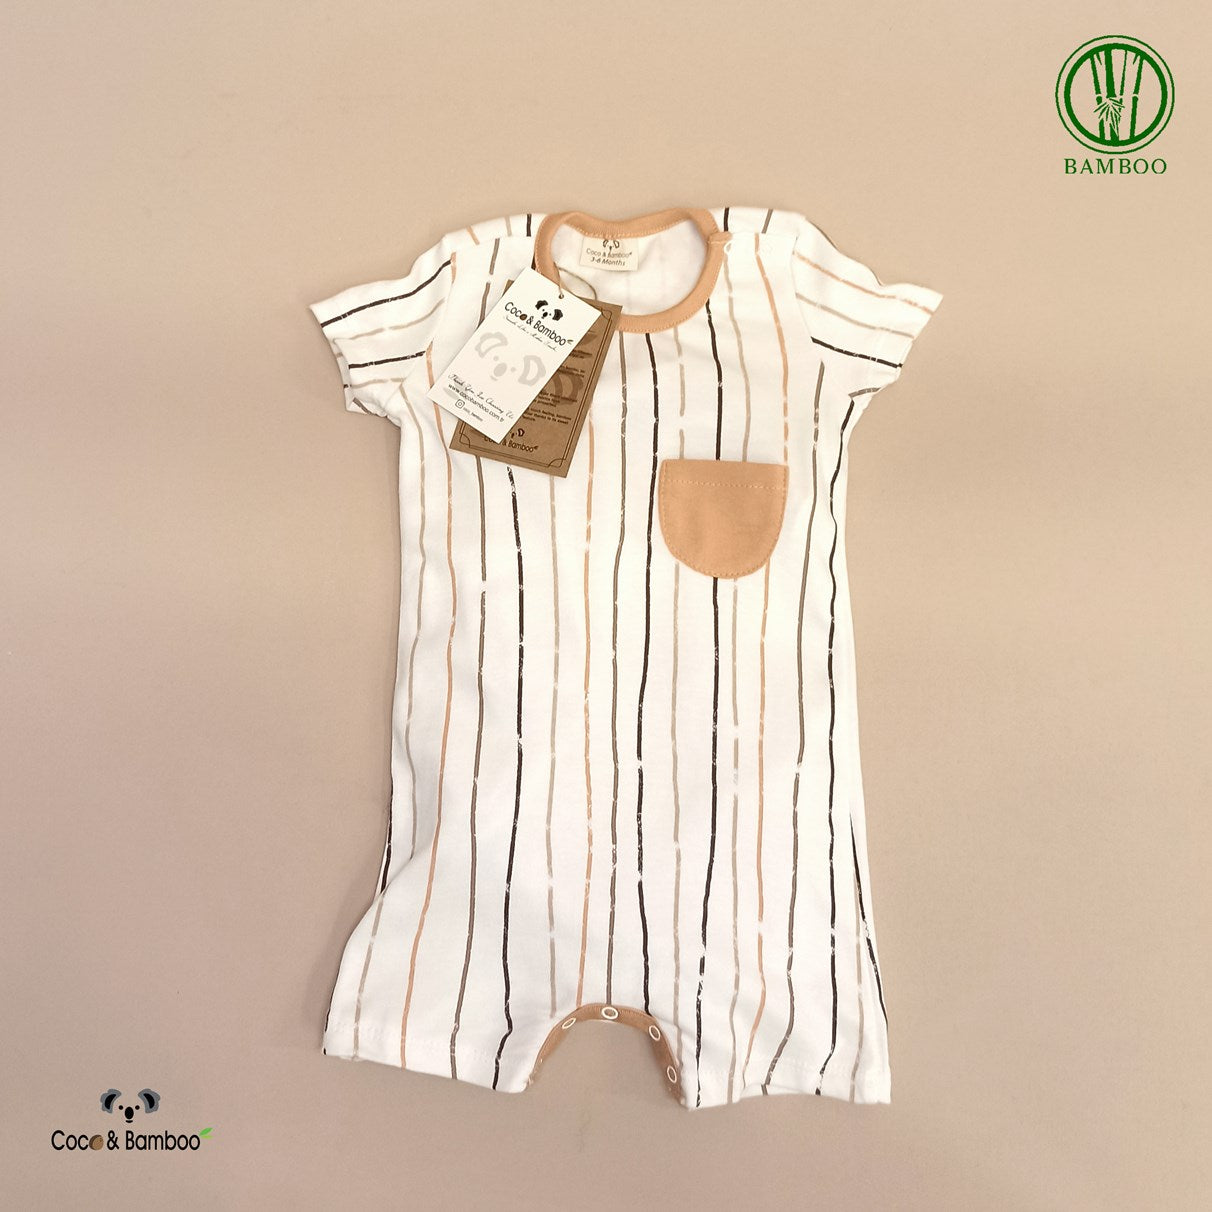 Elephant Printed Bamboo Romper -Aged 3m to 3 Yrs